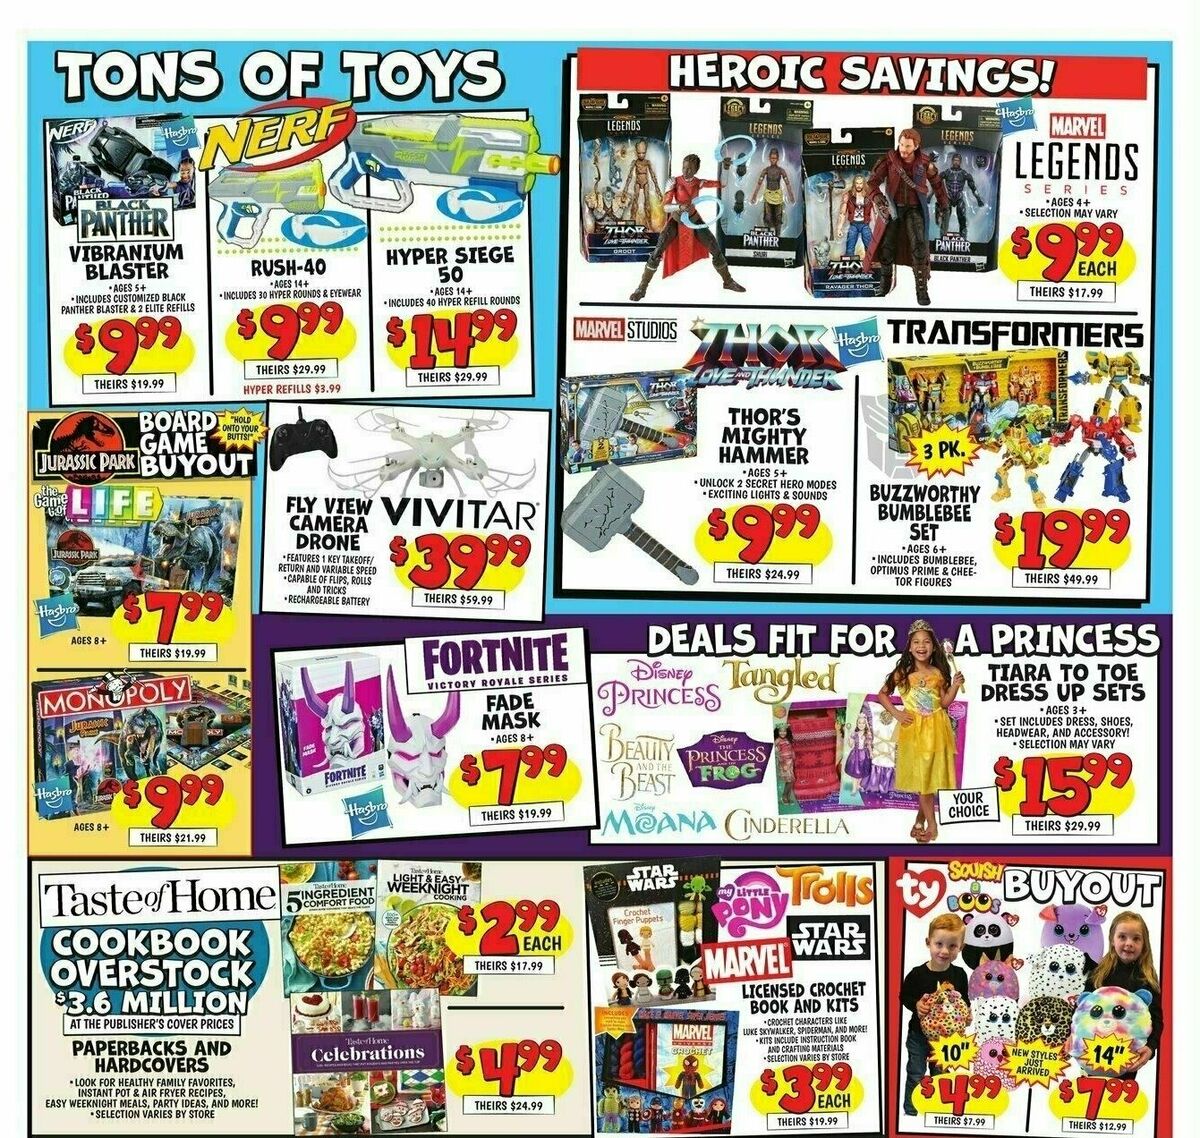 Ollie's Bargain Outlet Weekly Ad from October 4